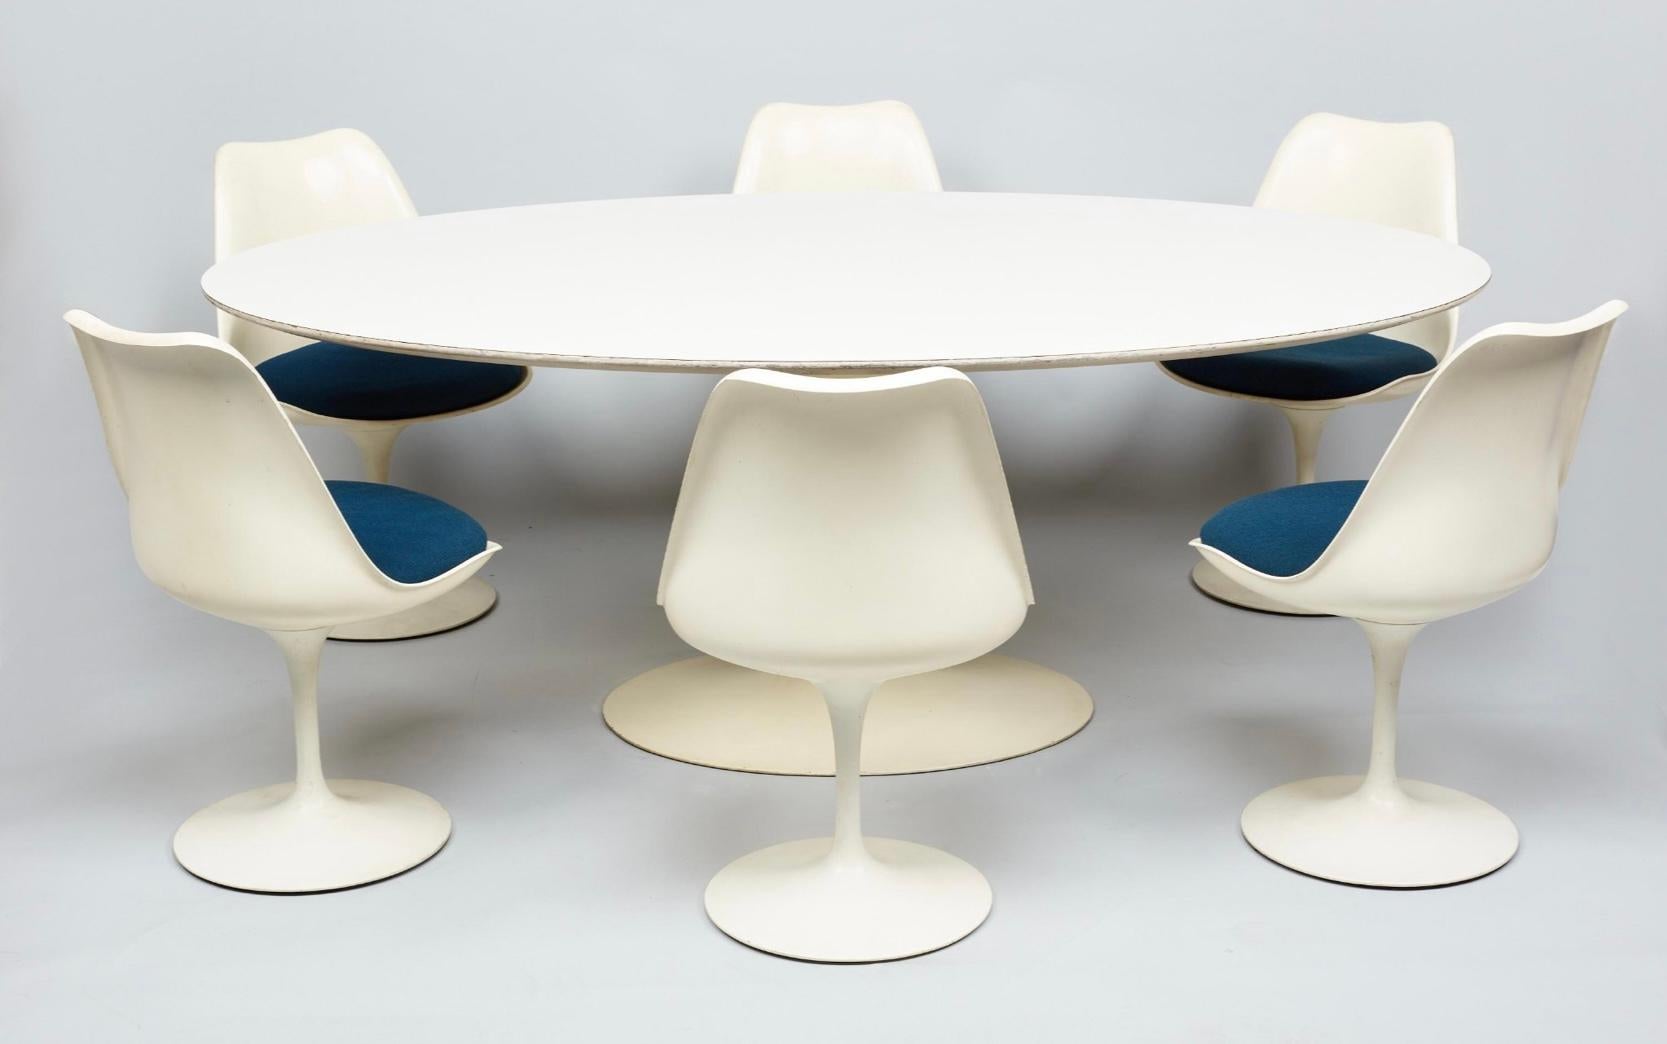 A rare complete late 1950’s Knoll Eero Saarinen Tulip Oval Tulip Table with six Saarinen matching chairs The Knoll label reads 575 Madison Ave. The fabric is original. Set in overall very good original condition. Retaining screws on the table are